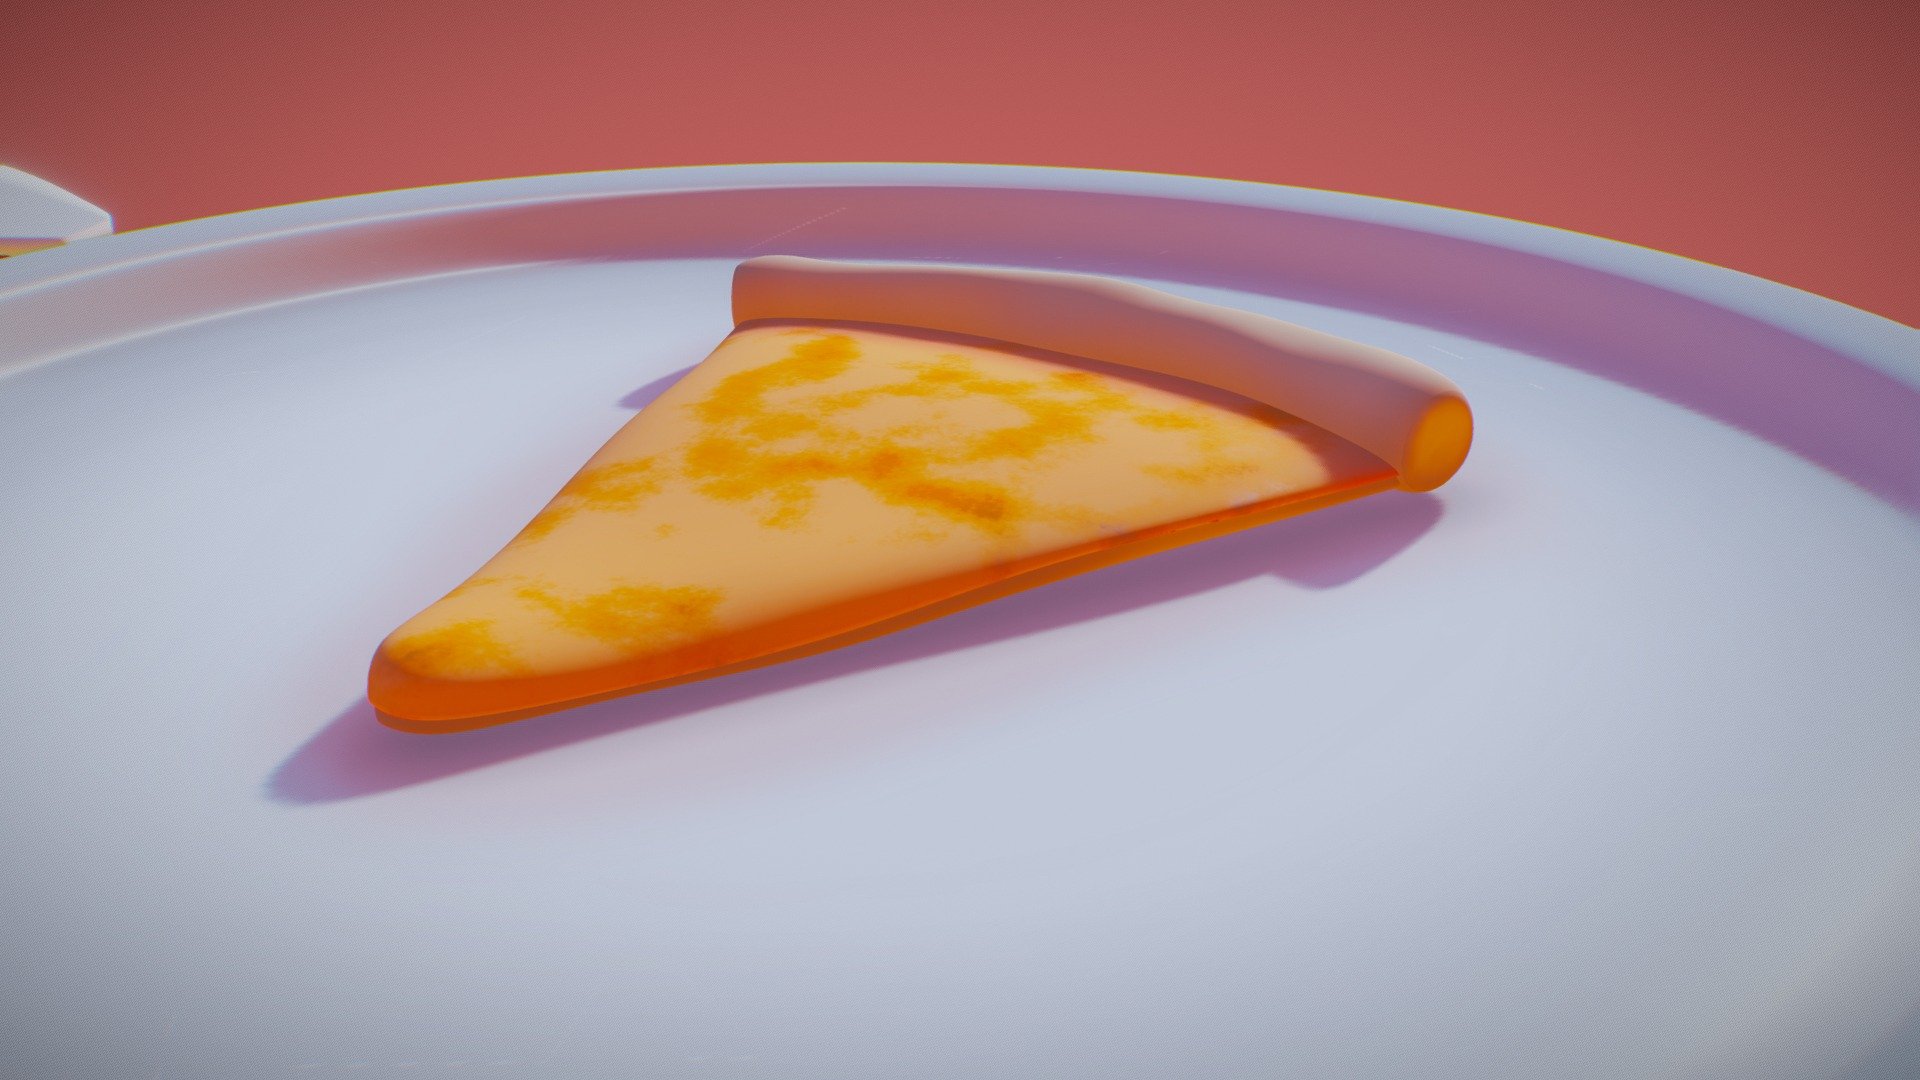 I really wanted to eat some pizza these days so I decided to make one myself.
Made with Blender + GIMP 3d model